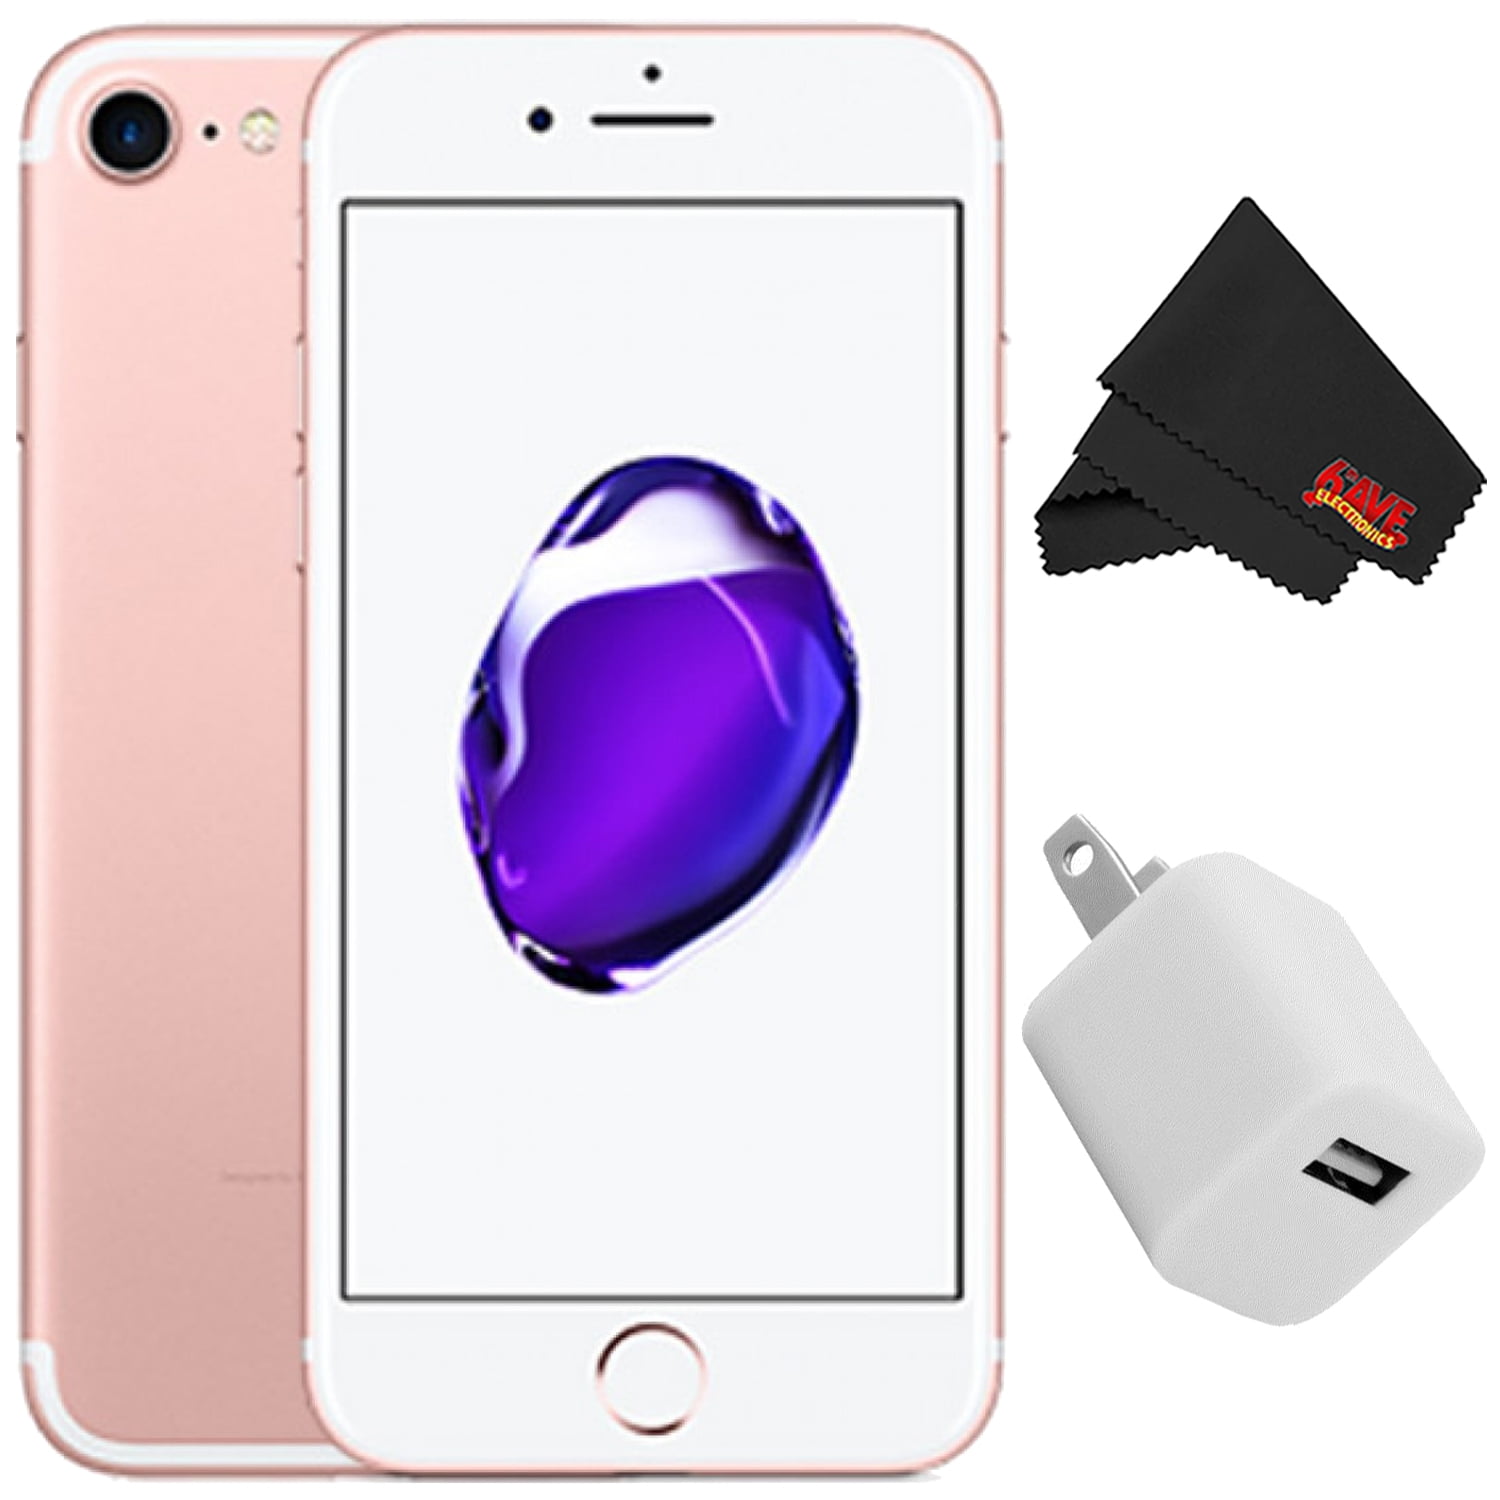 Apple iPhone 7 256GB - Gold (Unlocked) with Accessory Kit